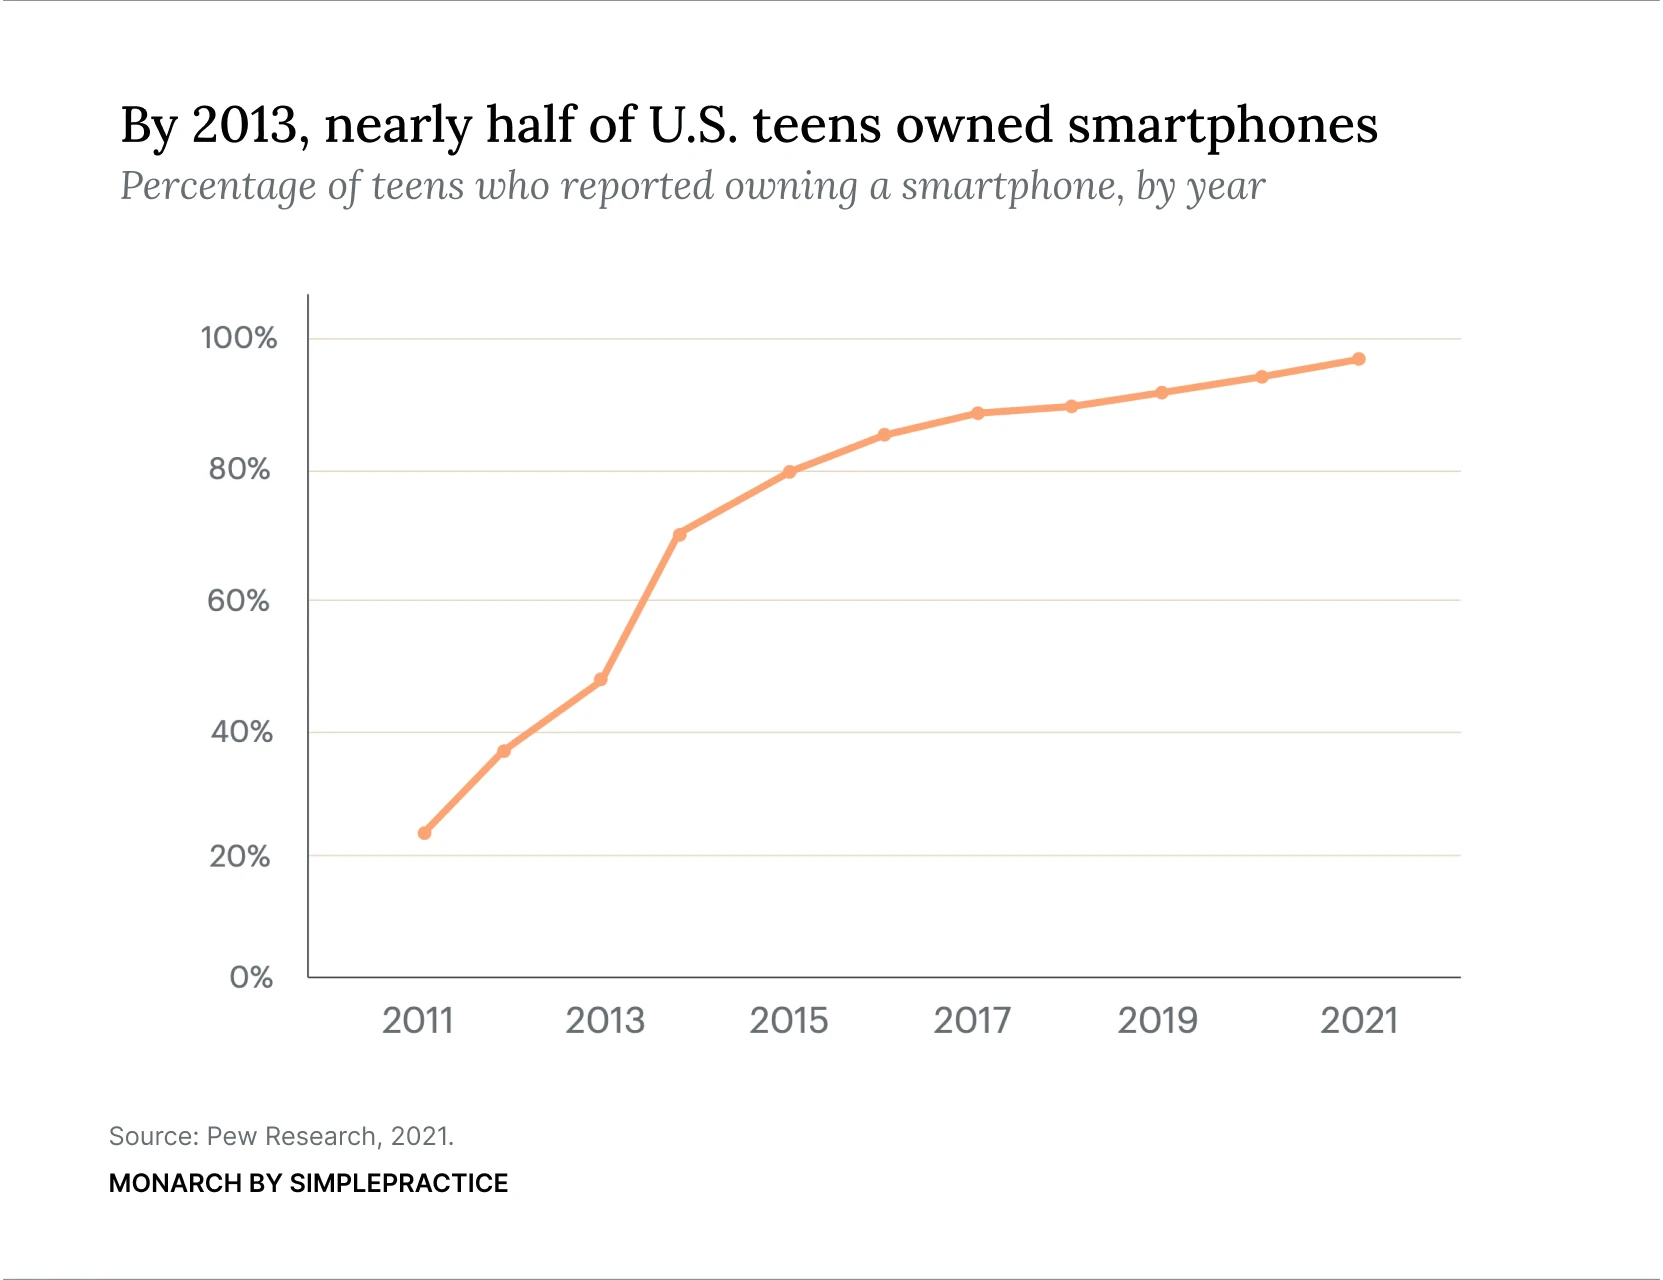 An orange line graph showing the percentage of teens that owned a smartphone by year. The data comes from Pew Research. The graph shows that after 2012, more than 50% of teens owned smartphones. 